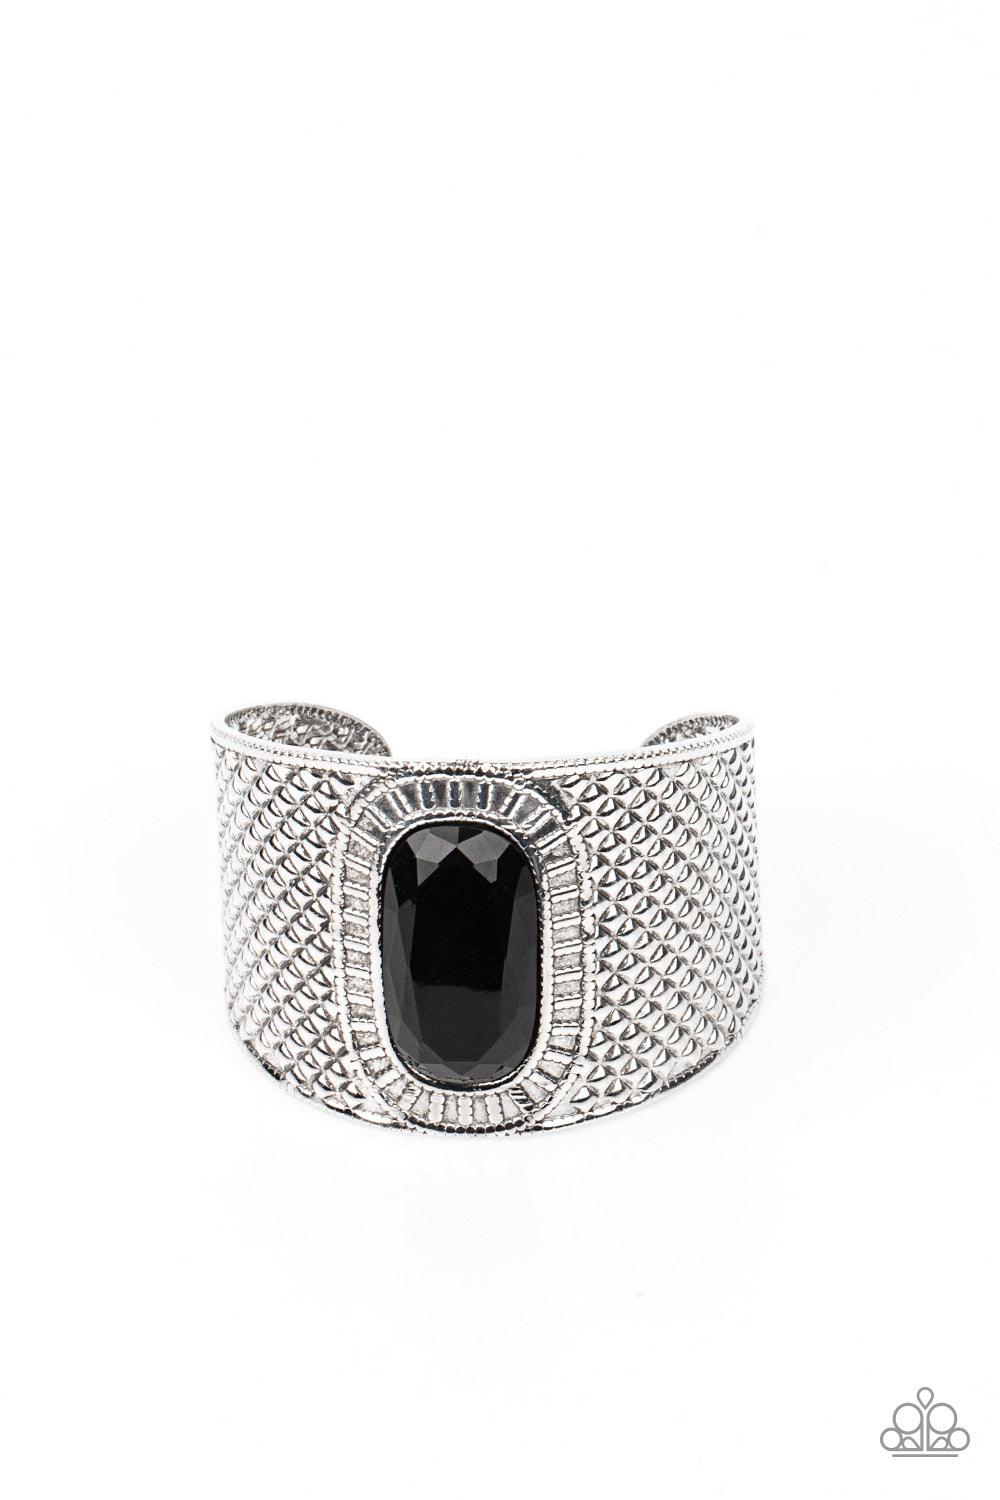 Paparazzi Accessories Poshly Pharaoh - Black An ovsized black gem is pressed into the center of a thick silver cuff embossed in diamond-like textures, creating a bold tribal inspired centerpiece around the wrist. Sold as one individual bracelet. Jewelry